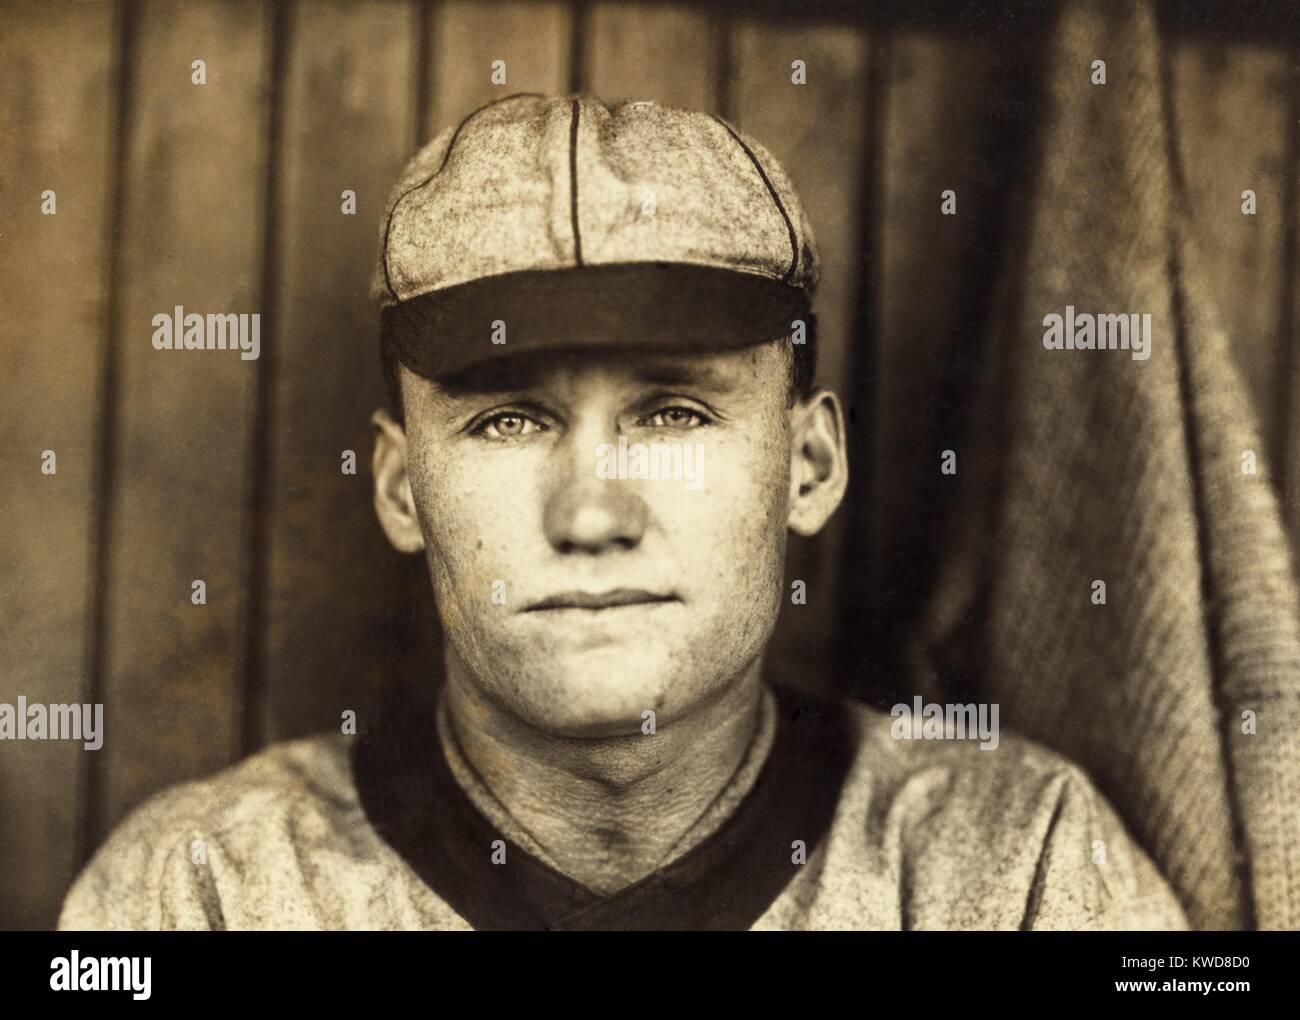 Walter Johnson in 1911. He signed with the Washington Senators in July 1907 at the age of nineteen and became a great Major League pitcher during his long career through the 1920s. (BSLOC 2015 17 32) Stock Photo